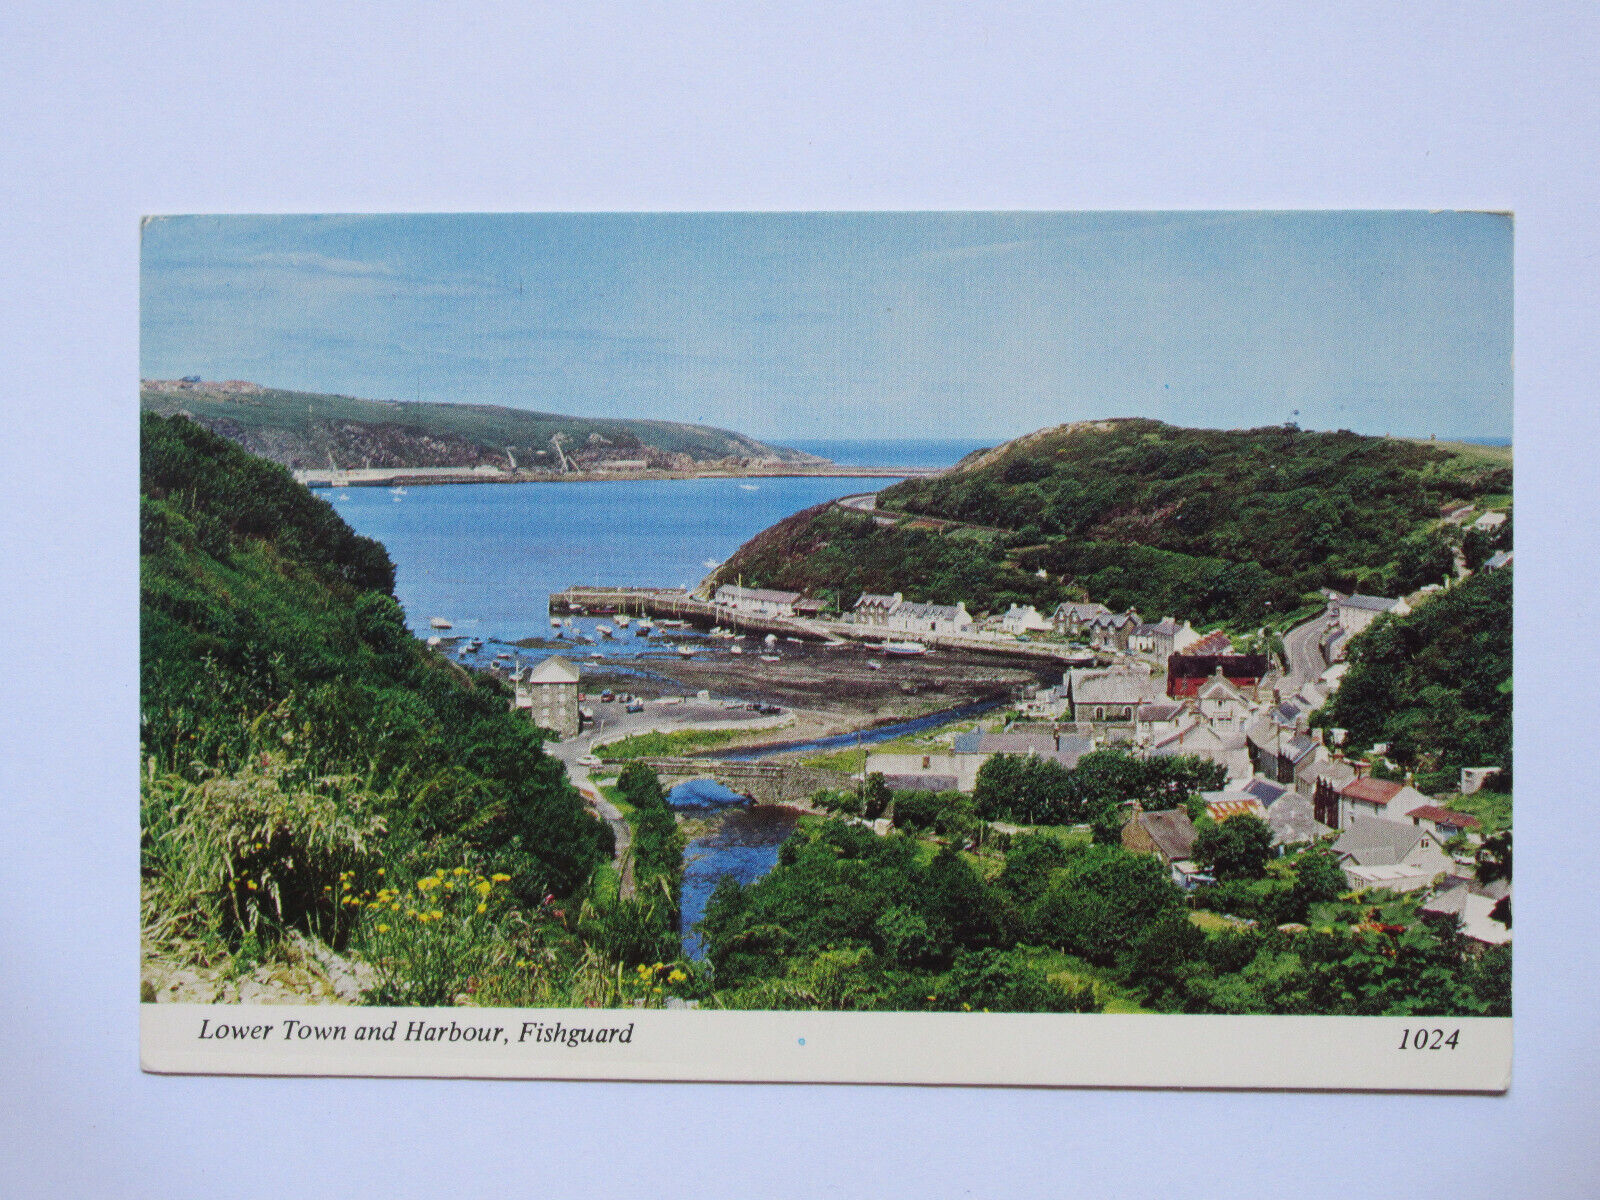 Lower Town & Harbour, Fishguard in Pembrokeshire, Wales Vintage Chrome Postcard